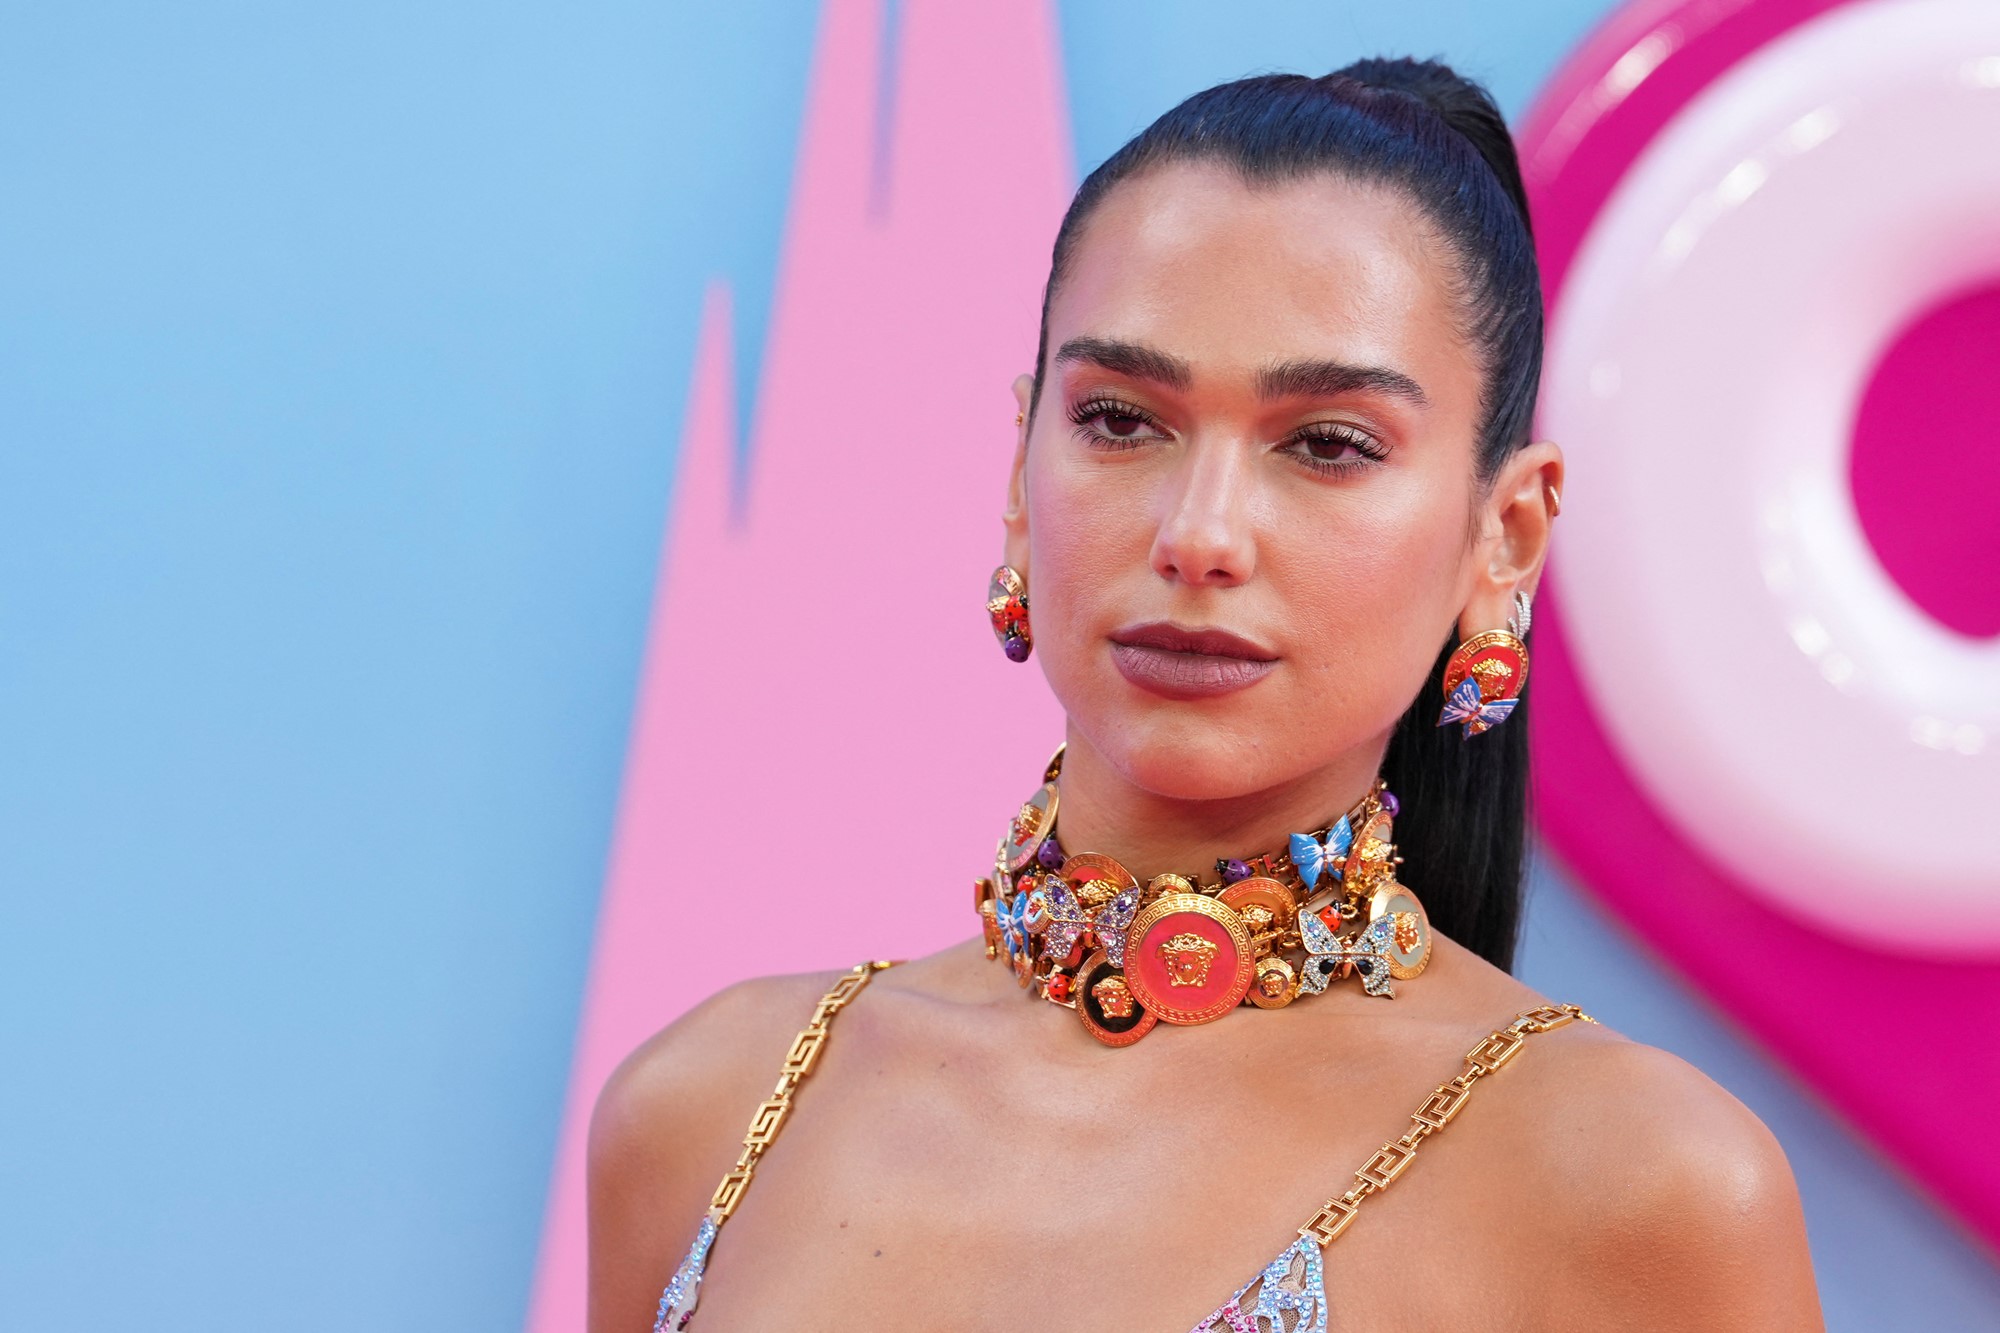 Dua Lipa with a slicked back updo, chunky necklace and earrings at barbie premiere